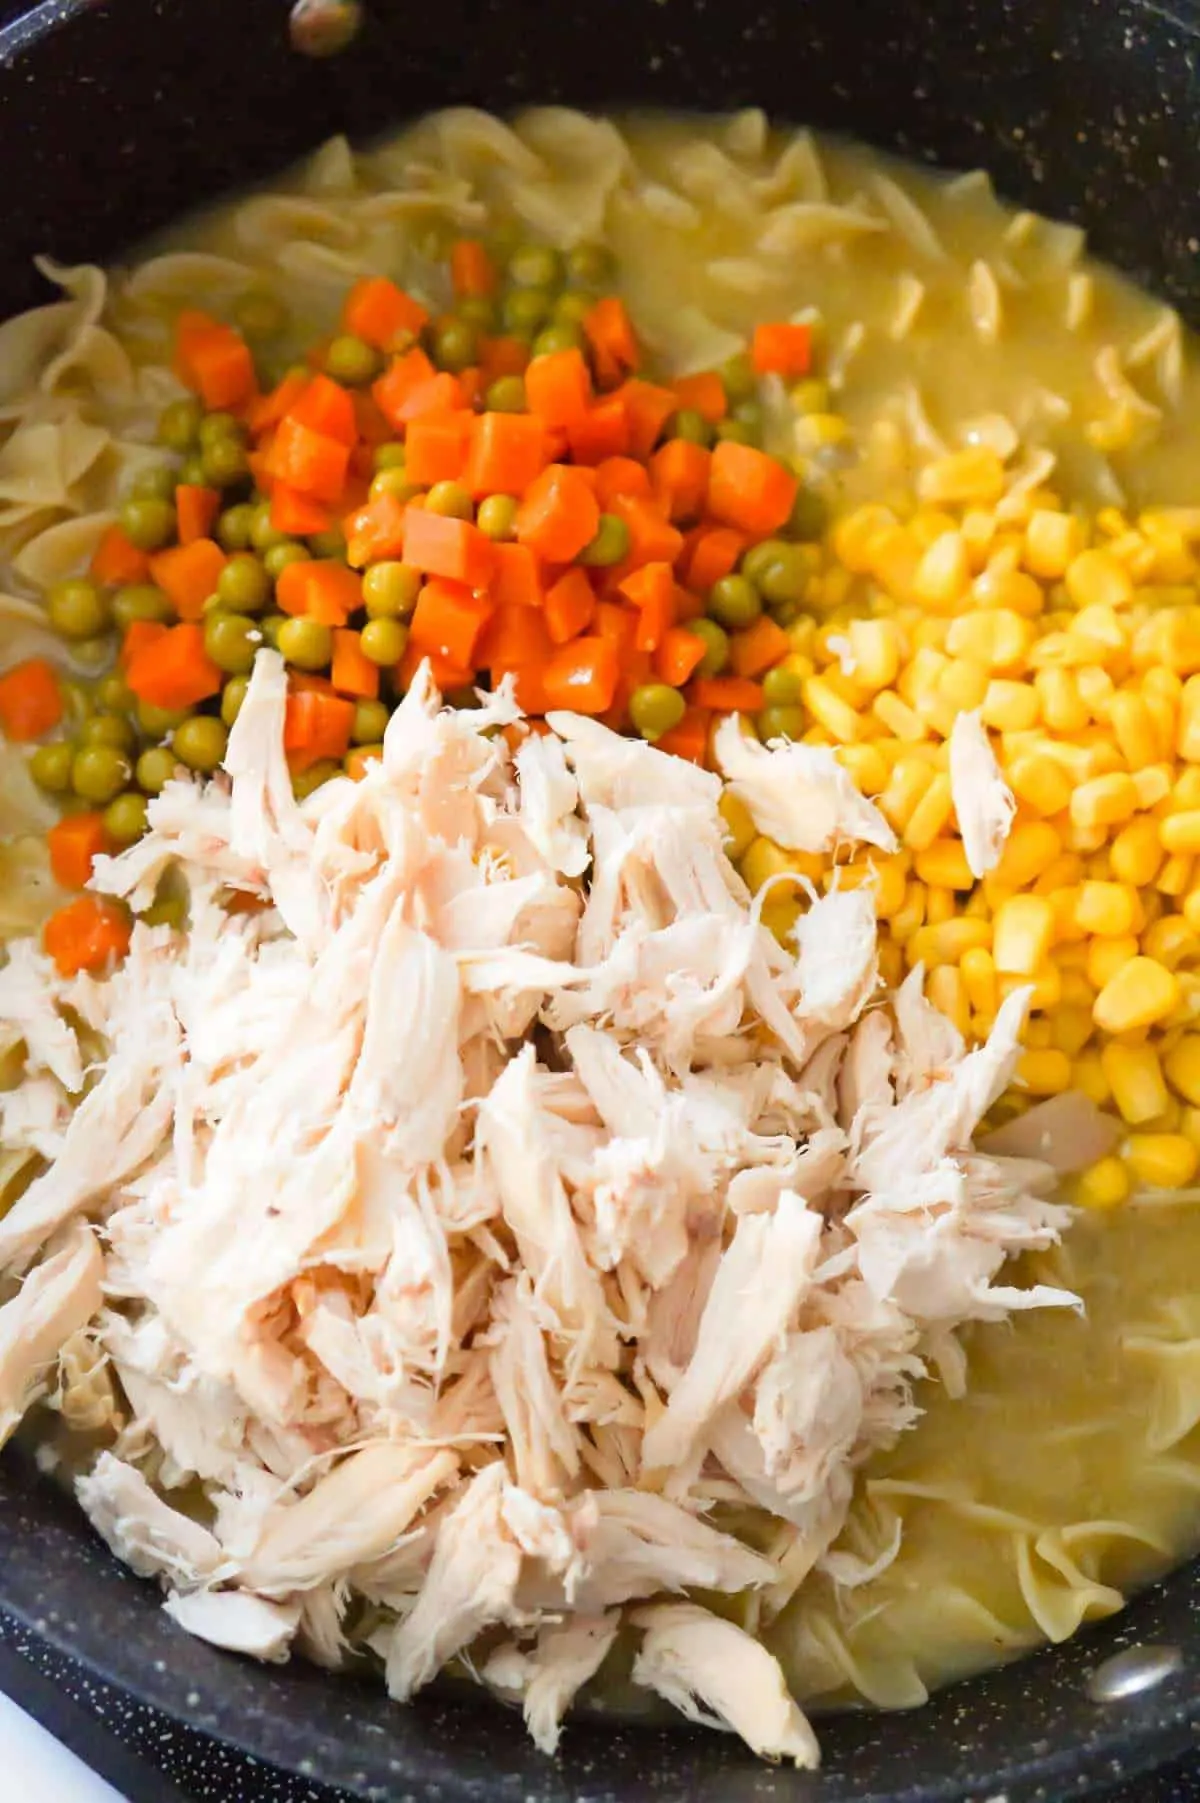 shredded rotisserie chicken, peas and carrots and corn on top of egg noodles in a pot